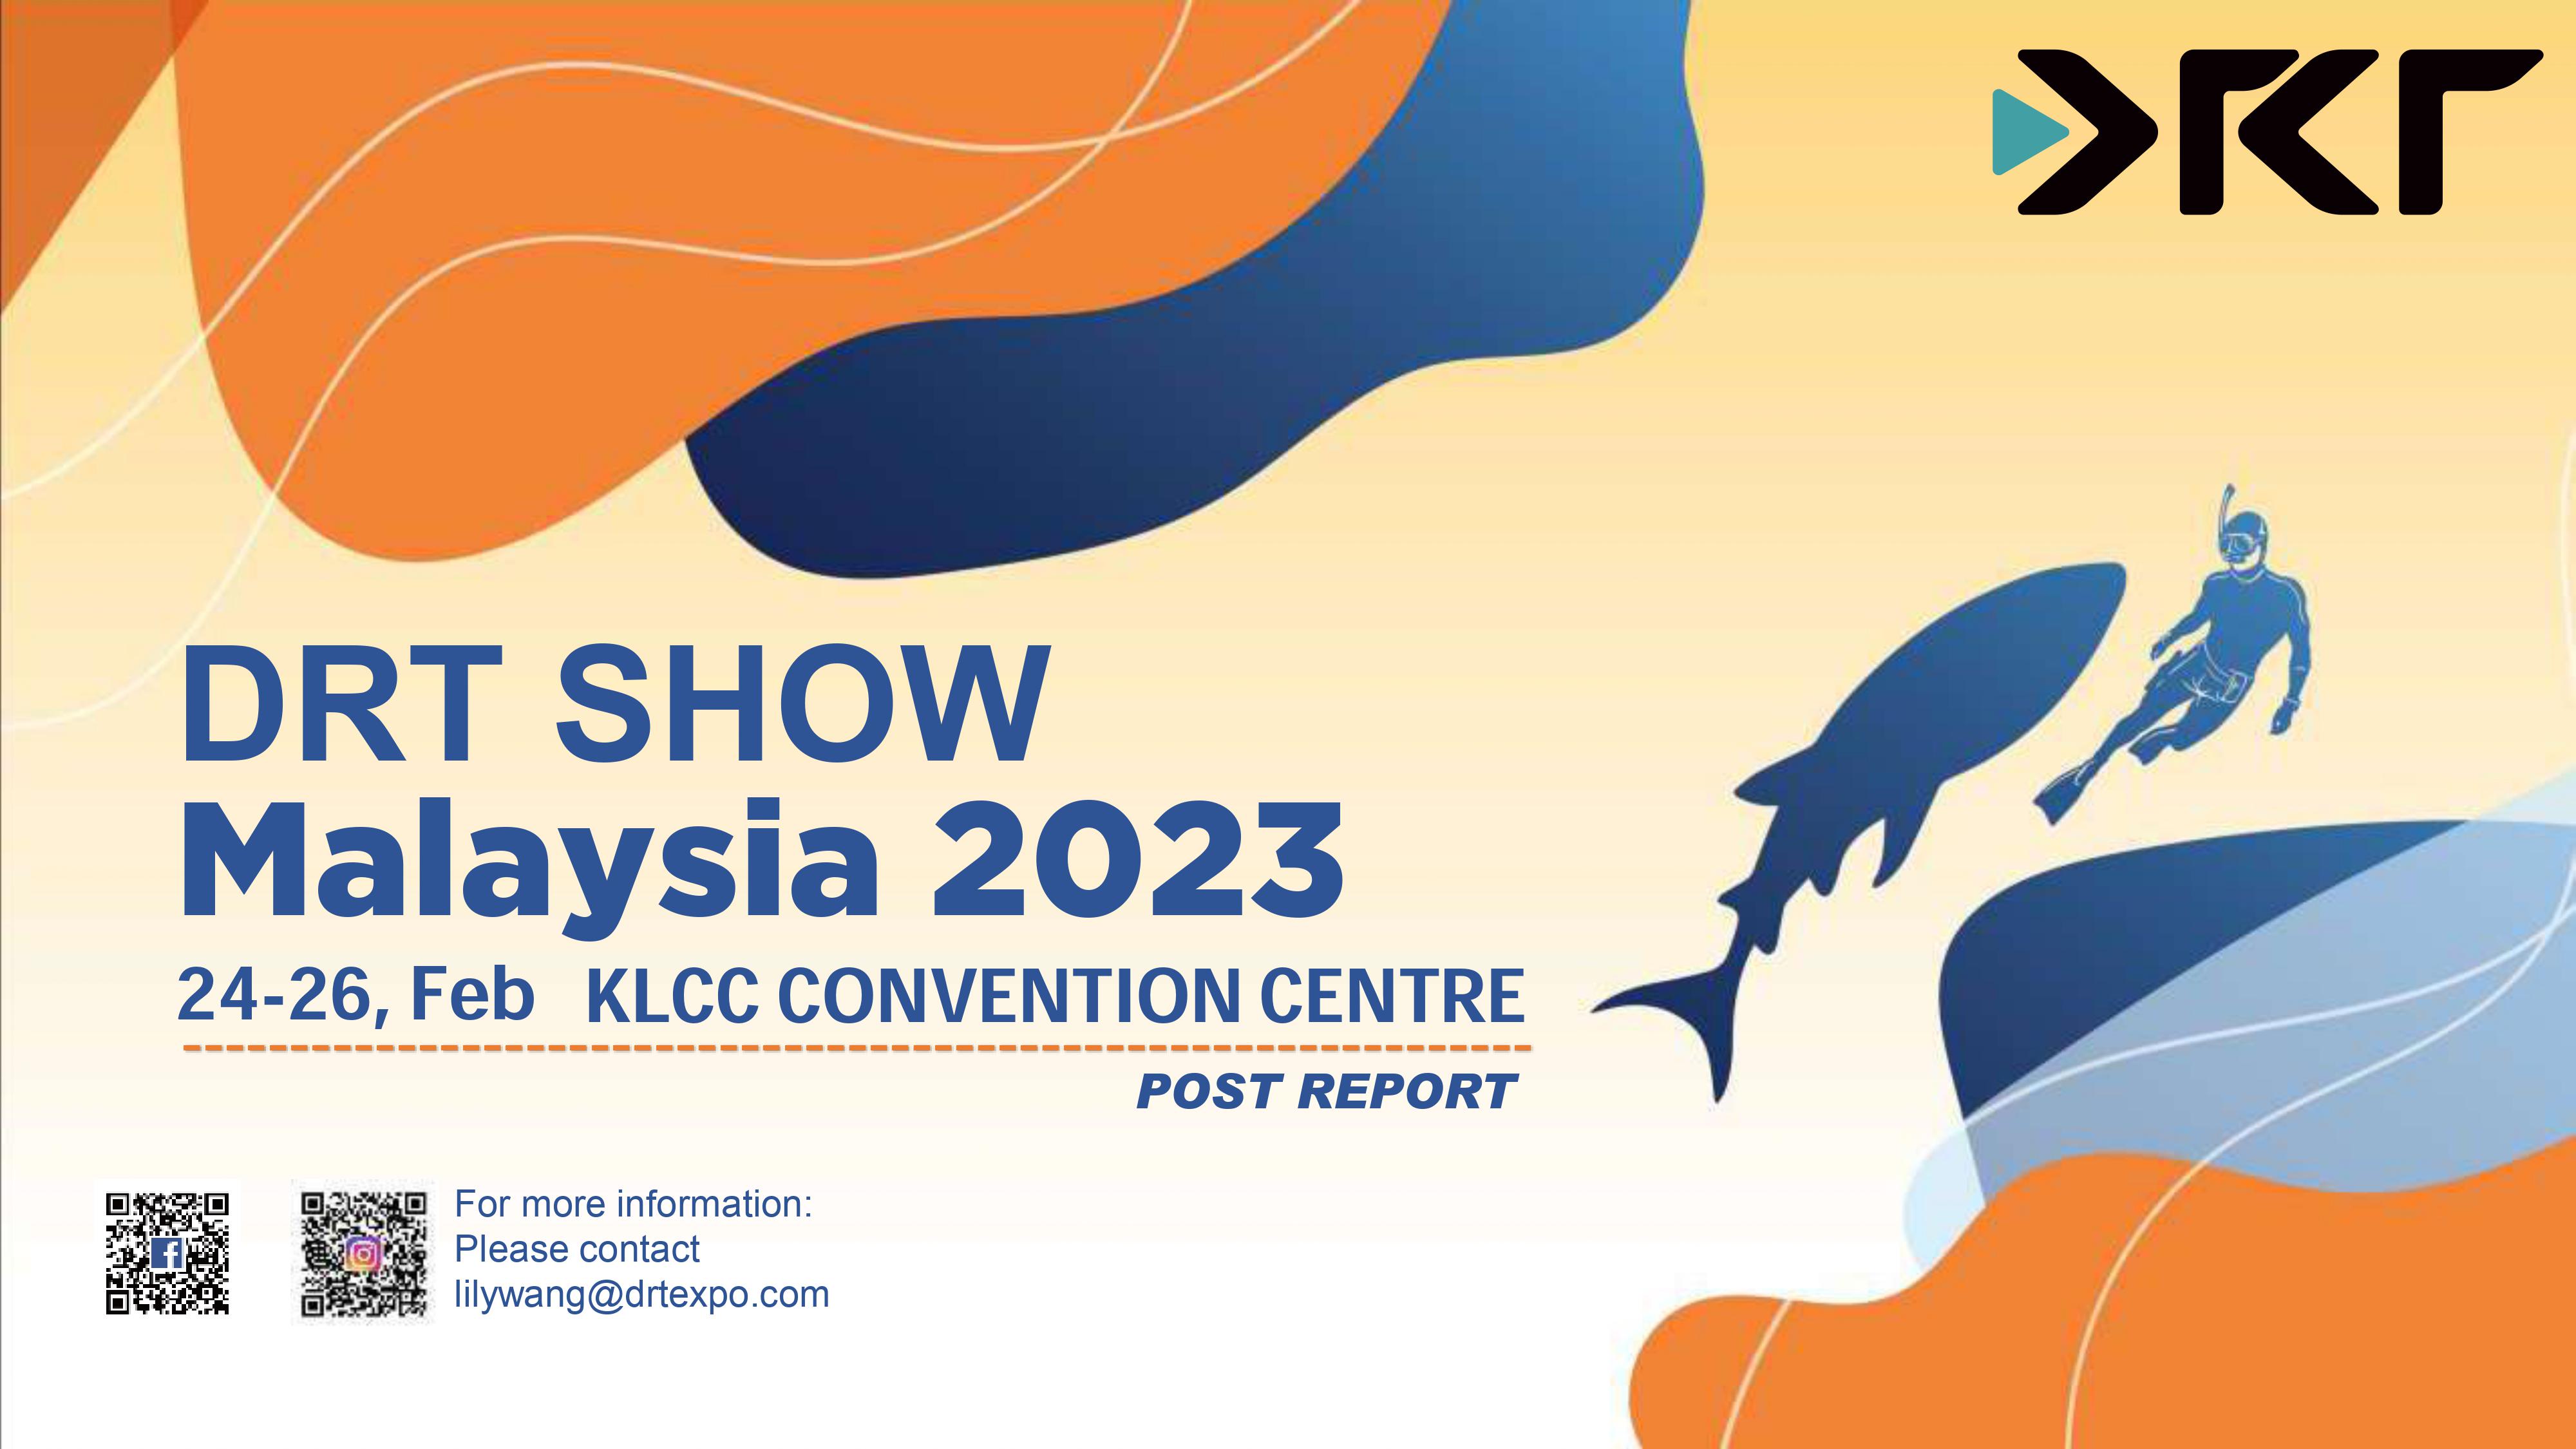 After a two-year hiatus, DRT SHOW Malaysia 2023 is back and ignite enthusiasm once again!